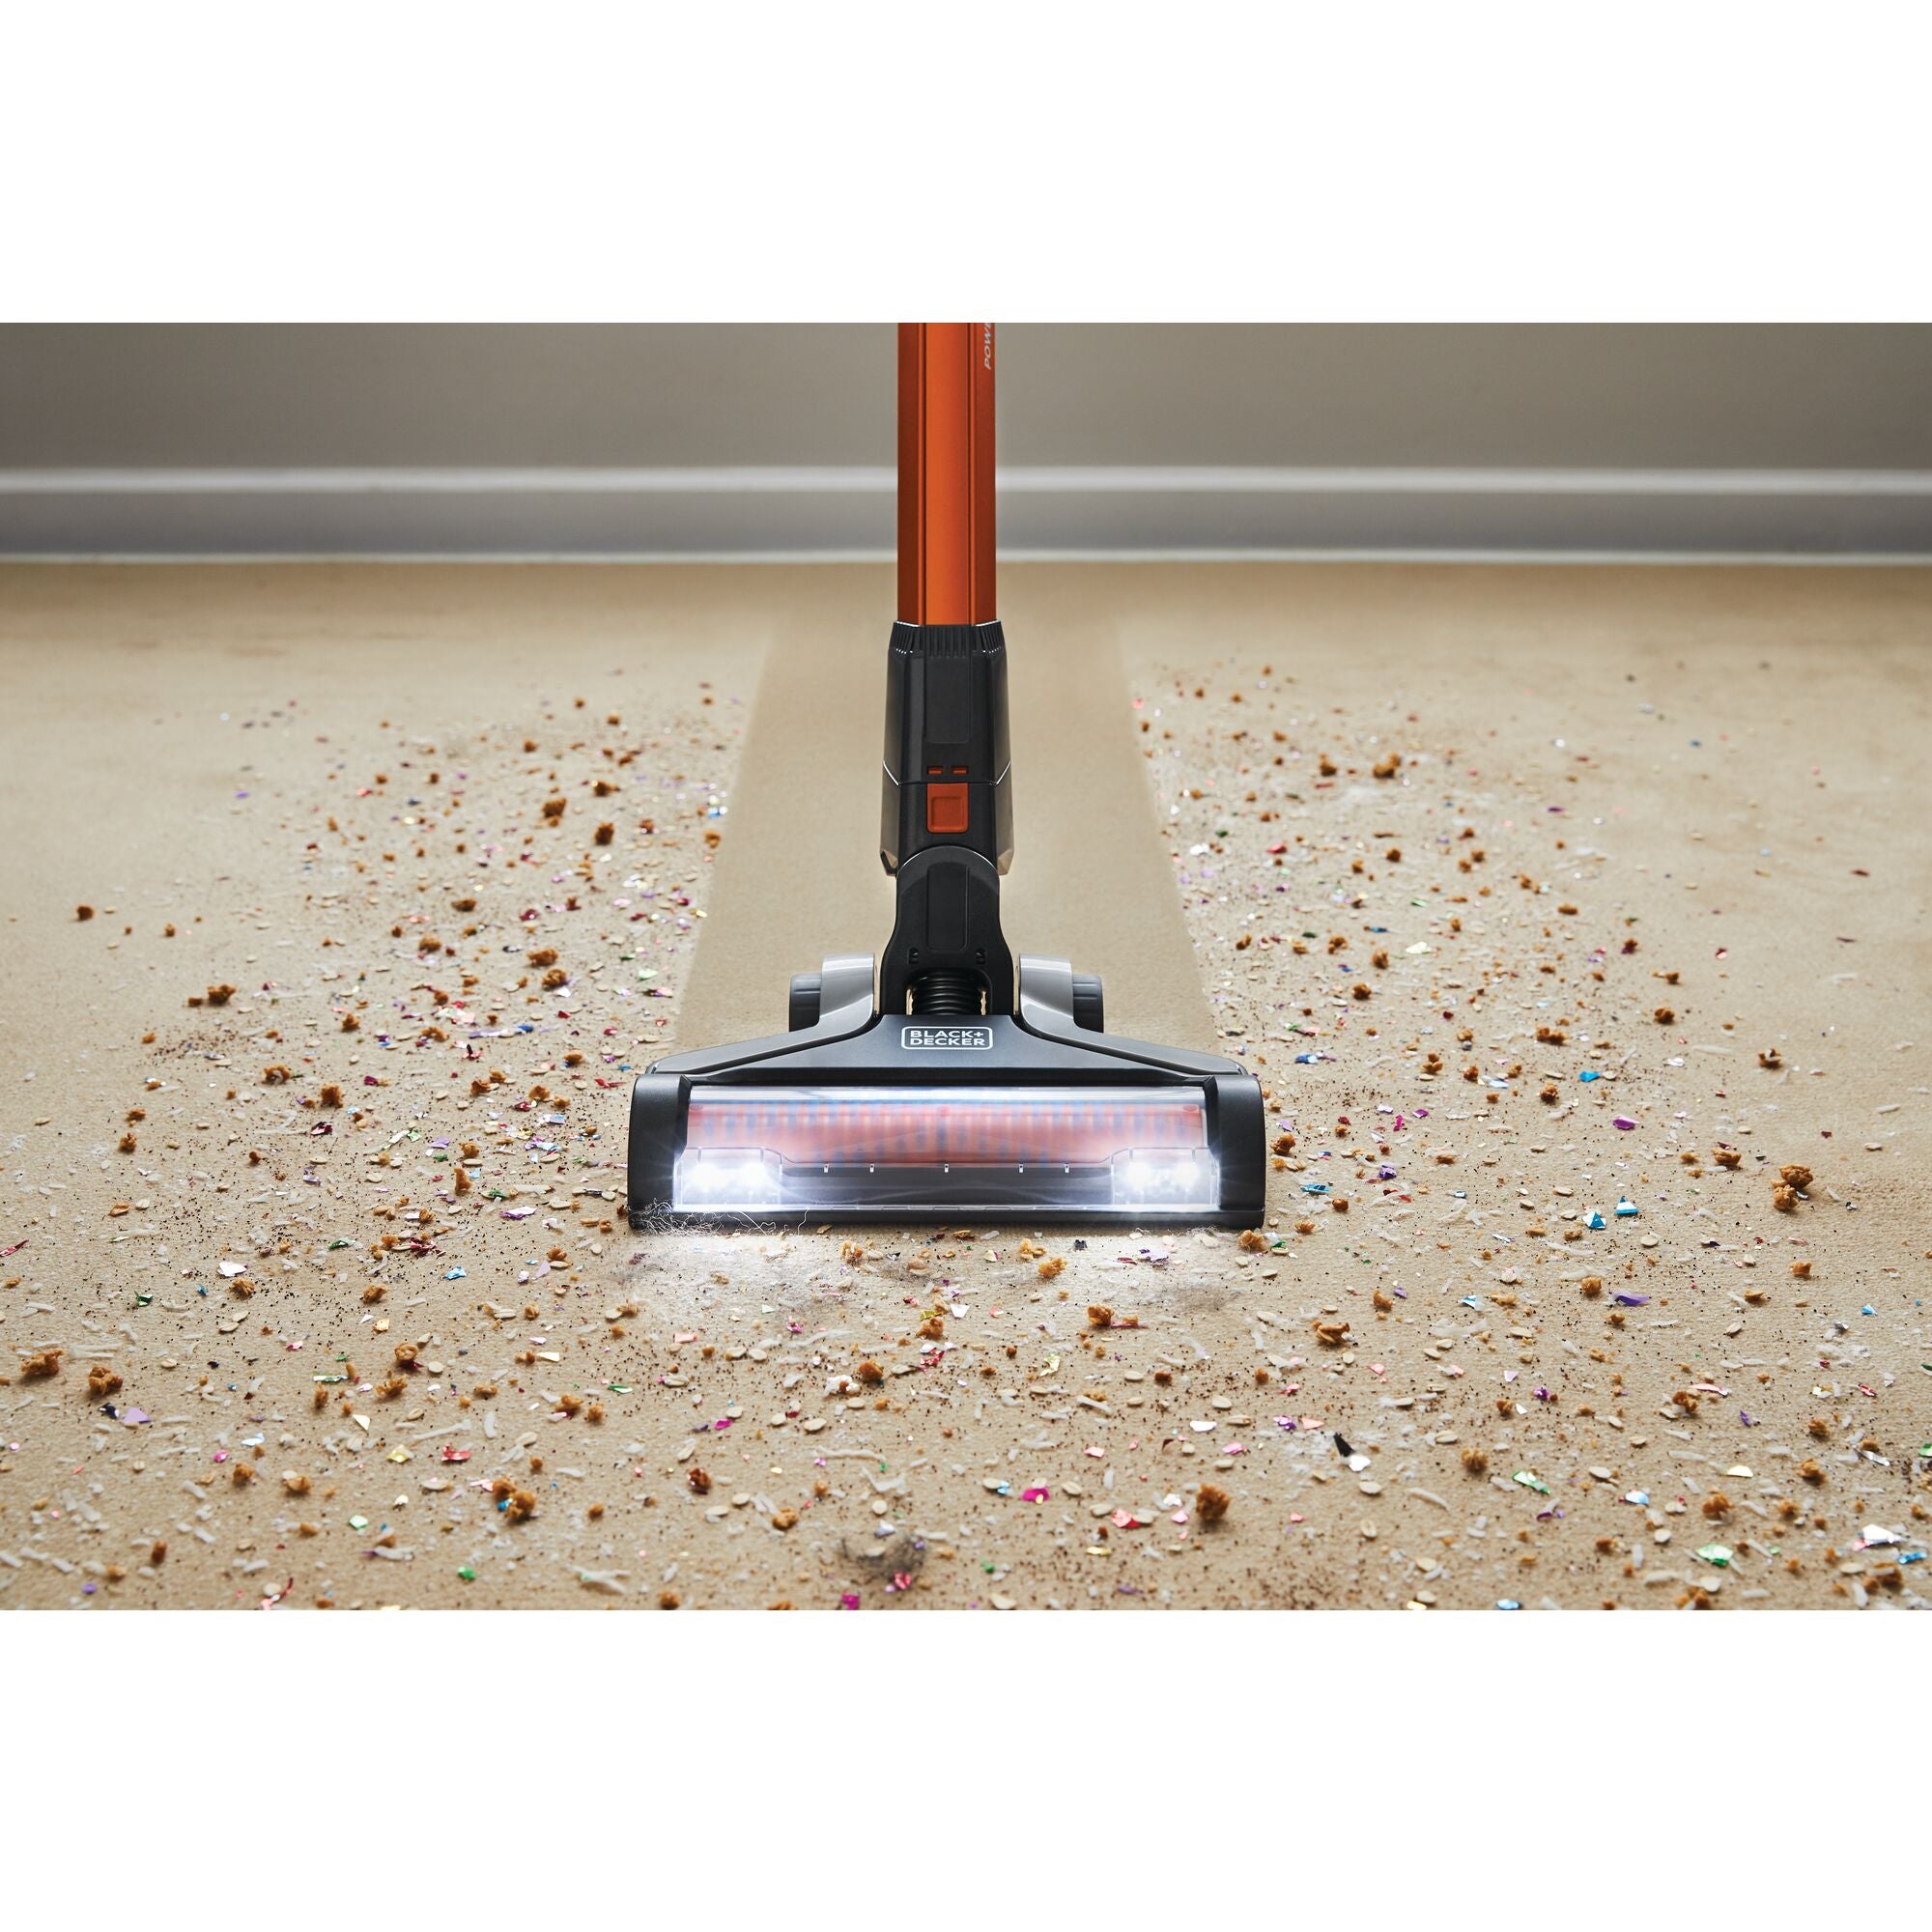 Powerseries Extreme Cordless Stick Vacuum Cleaner